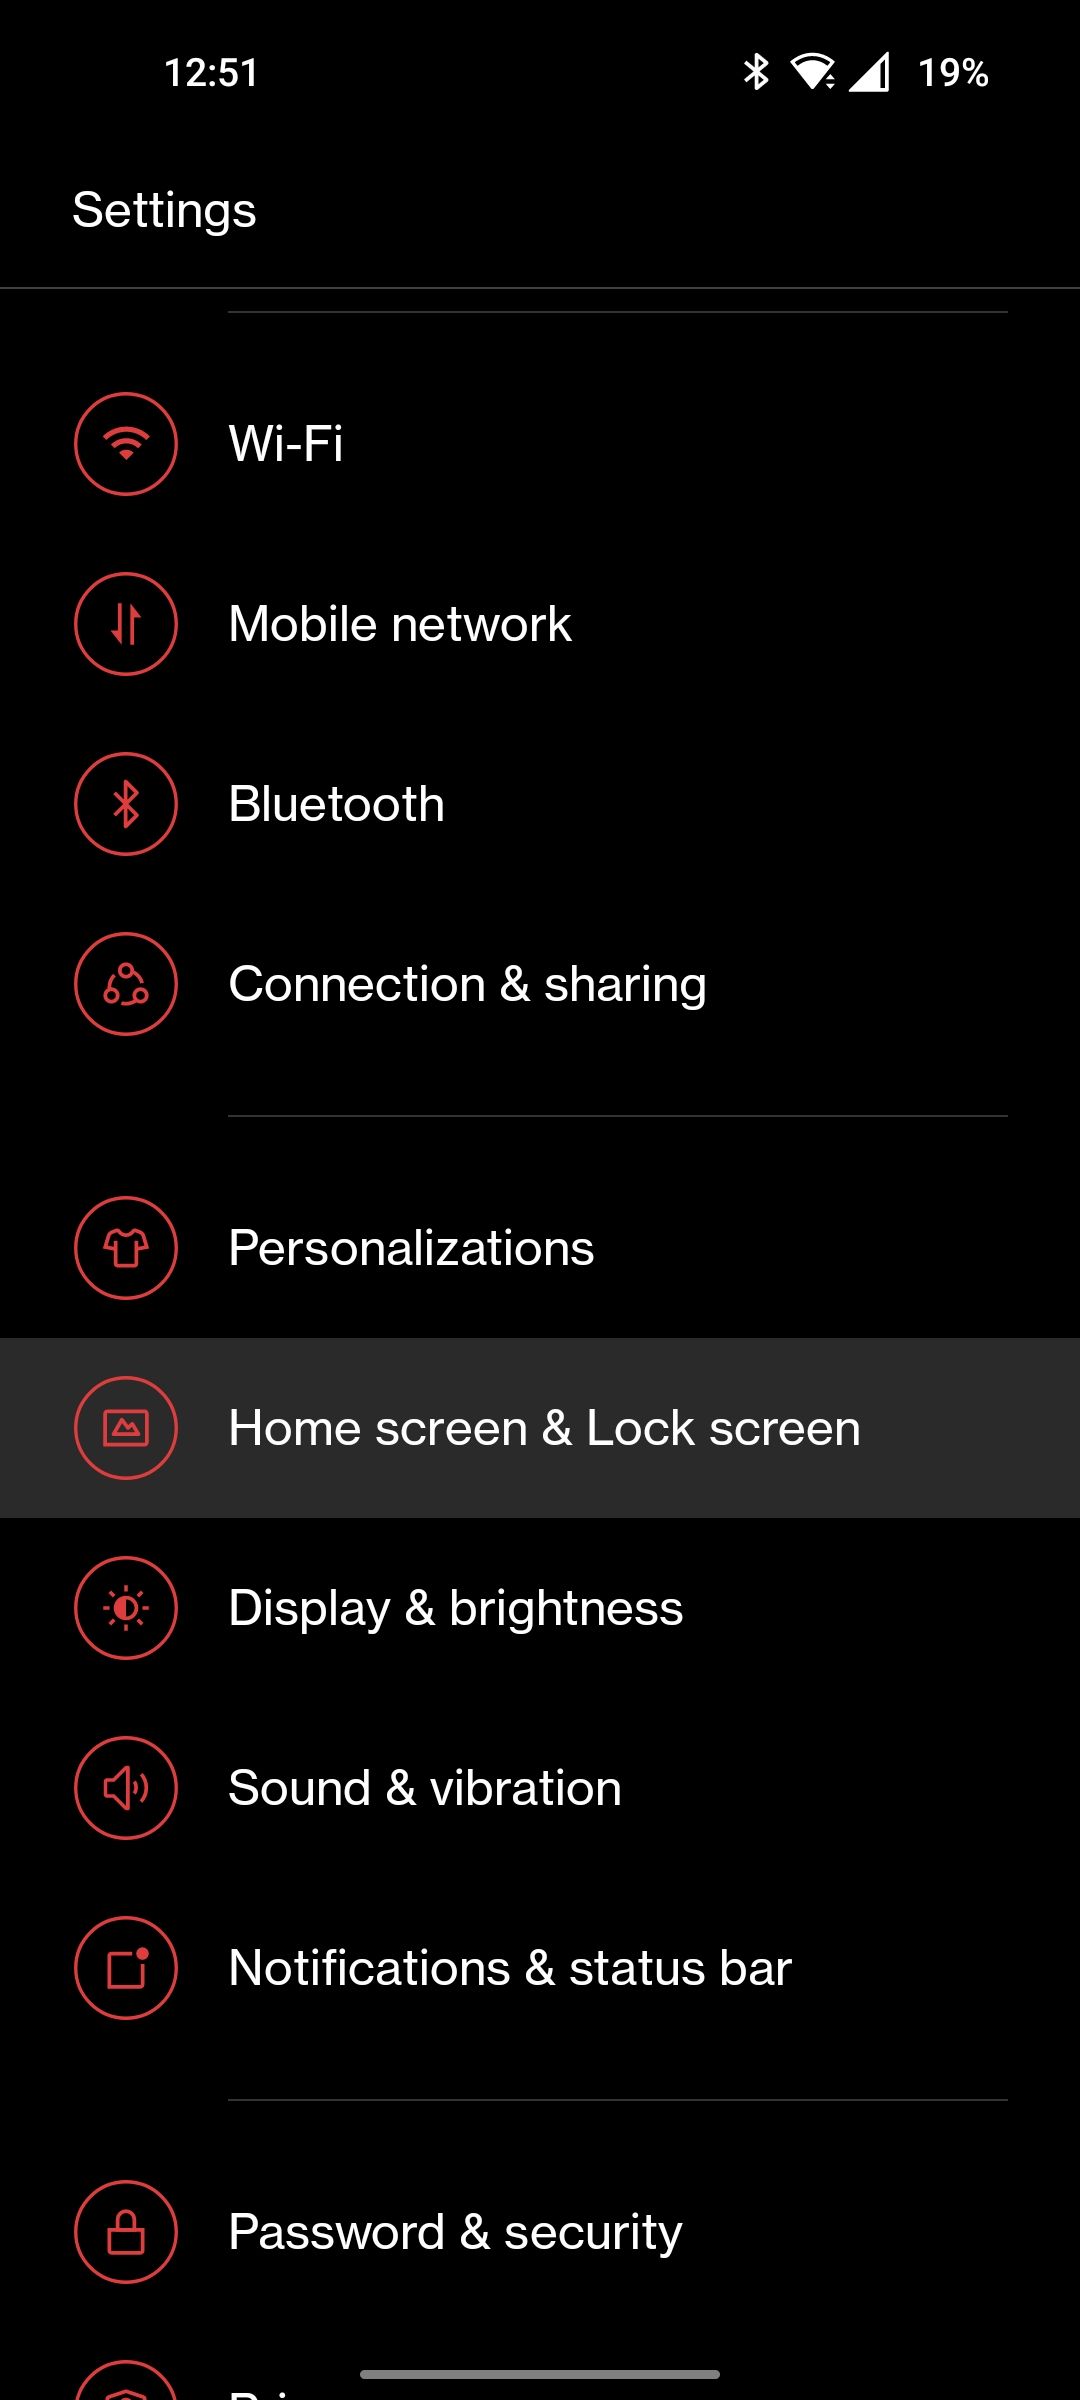 OnePlus settings app with home screen settings highlighted 